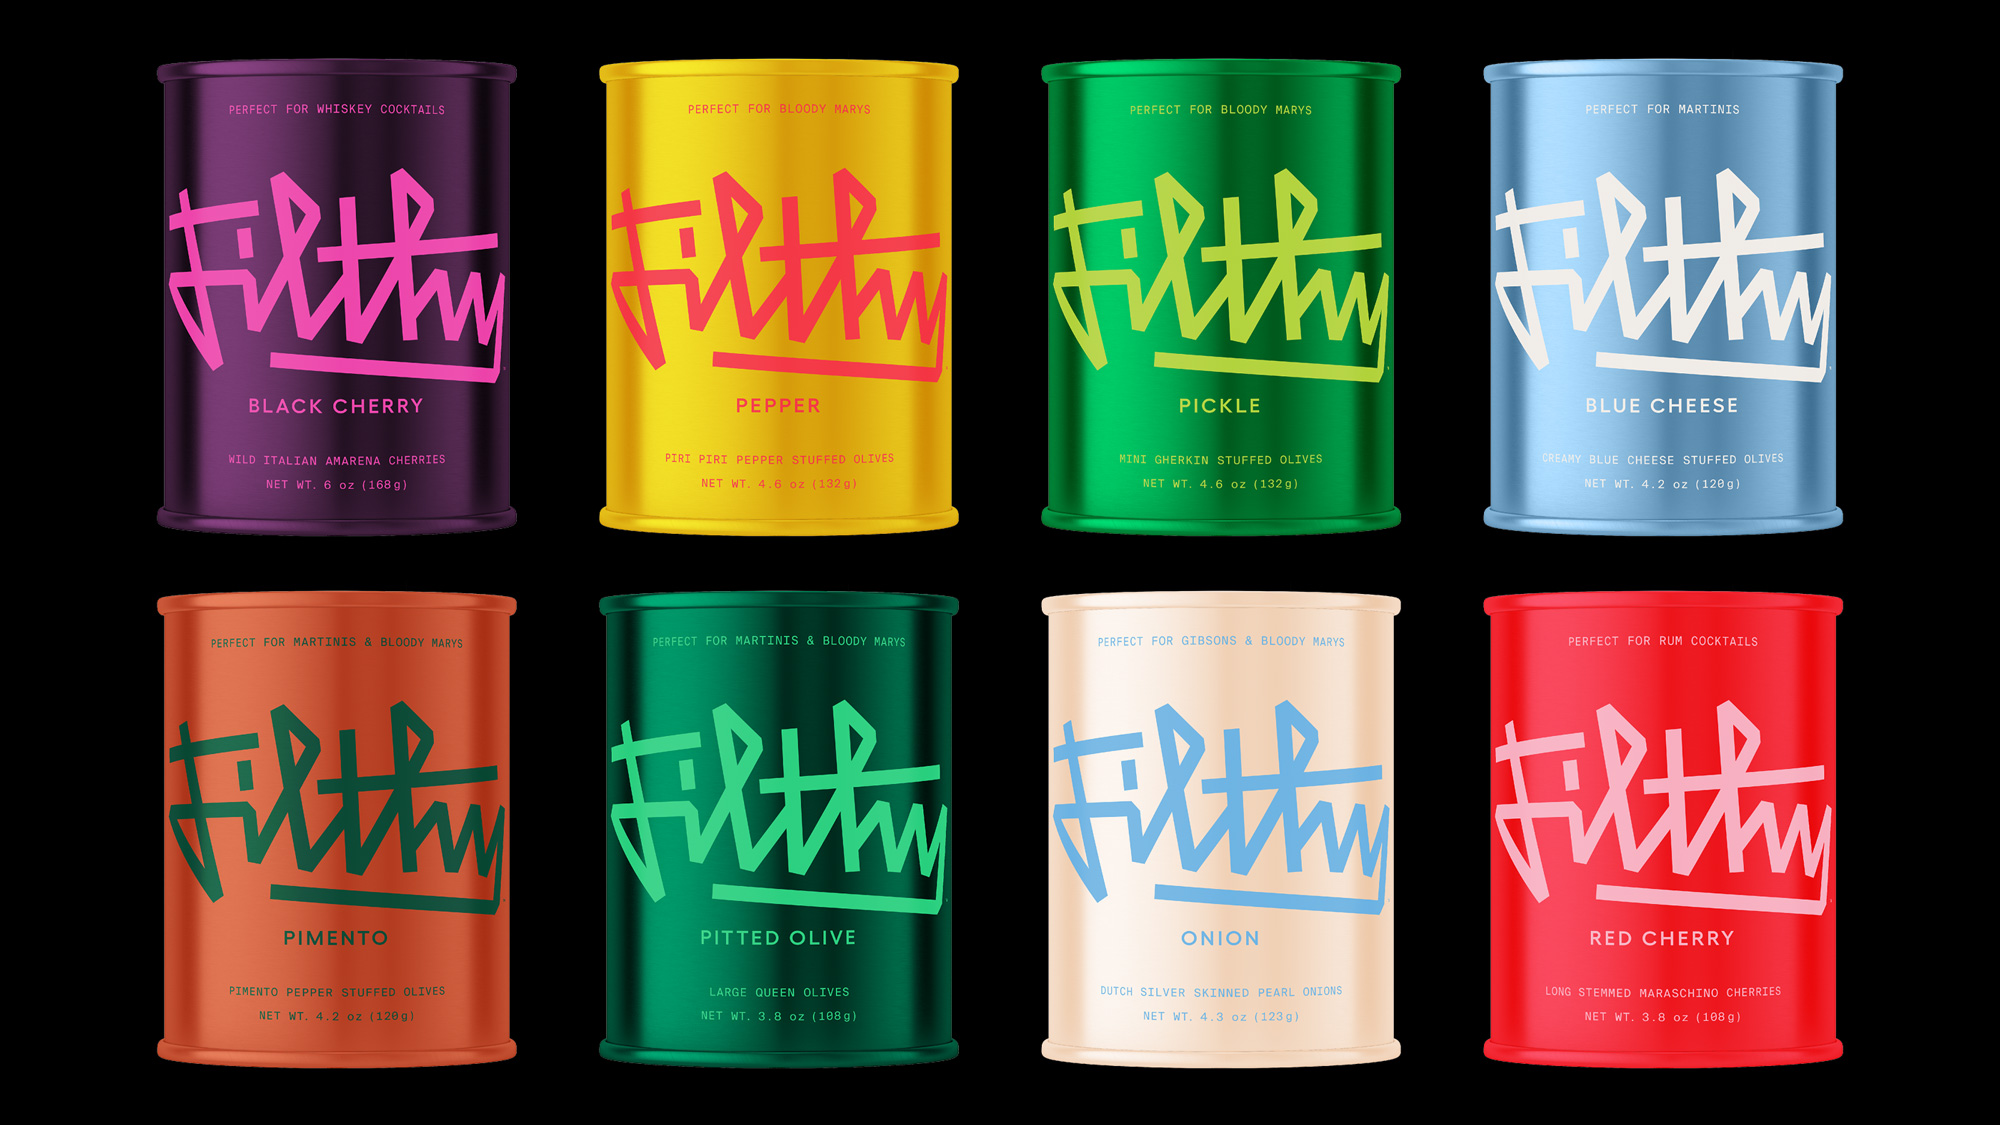 New Logo, Identity, and Packaging for Filthy Food by Mother Design